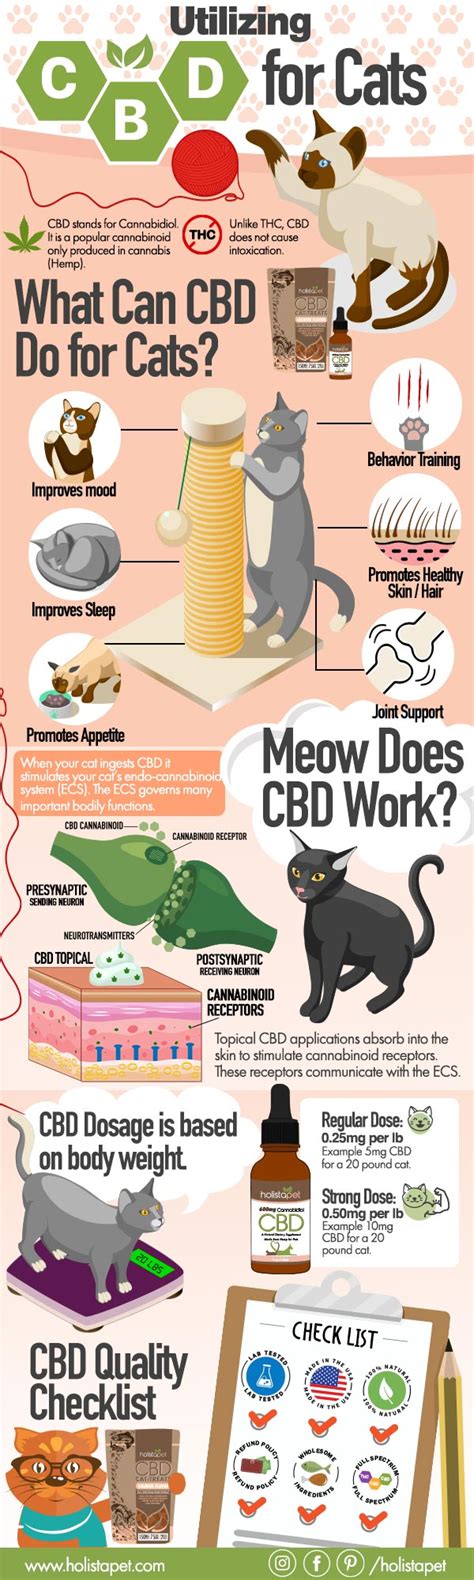 Buy cbd oil products for your pets: Utilizing CBD for Cats - Submit Infographics